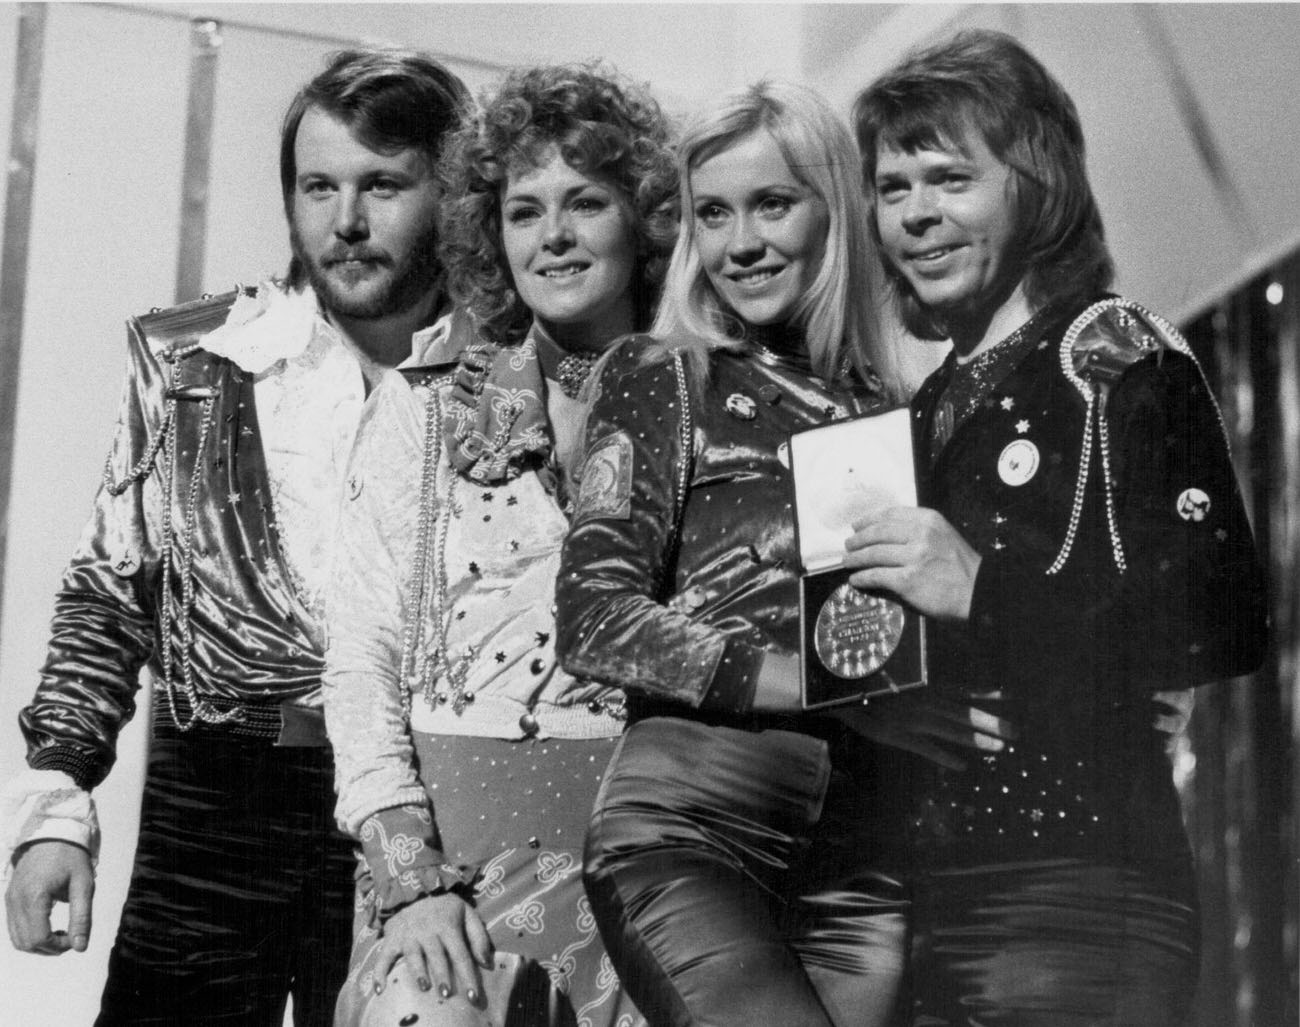 Swedish pop group Abba on stage, after winning the Eurovision Song Contest, Brighton, England, April 7th 1974.